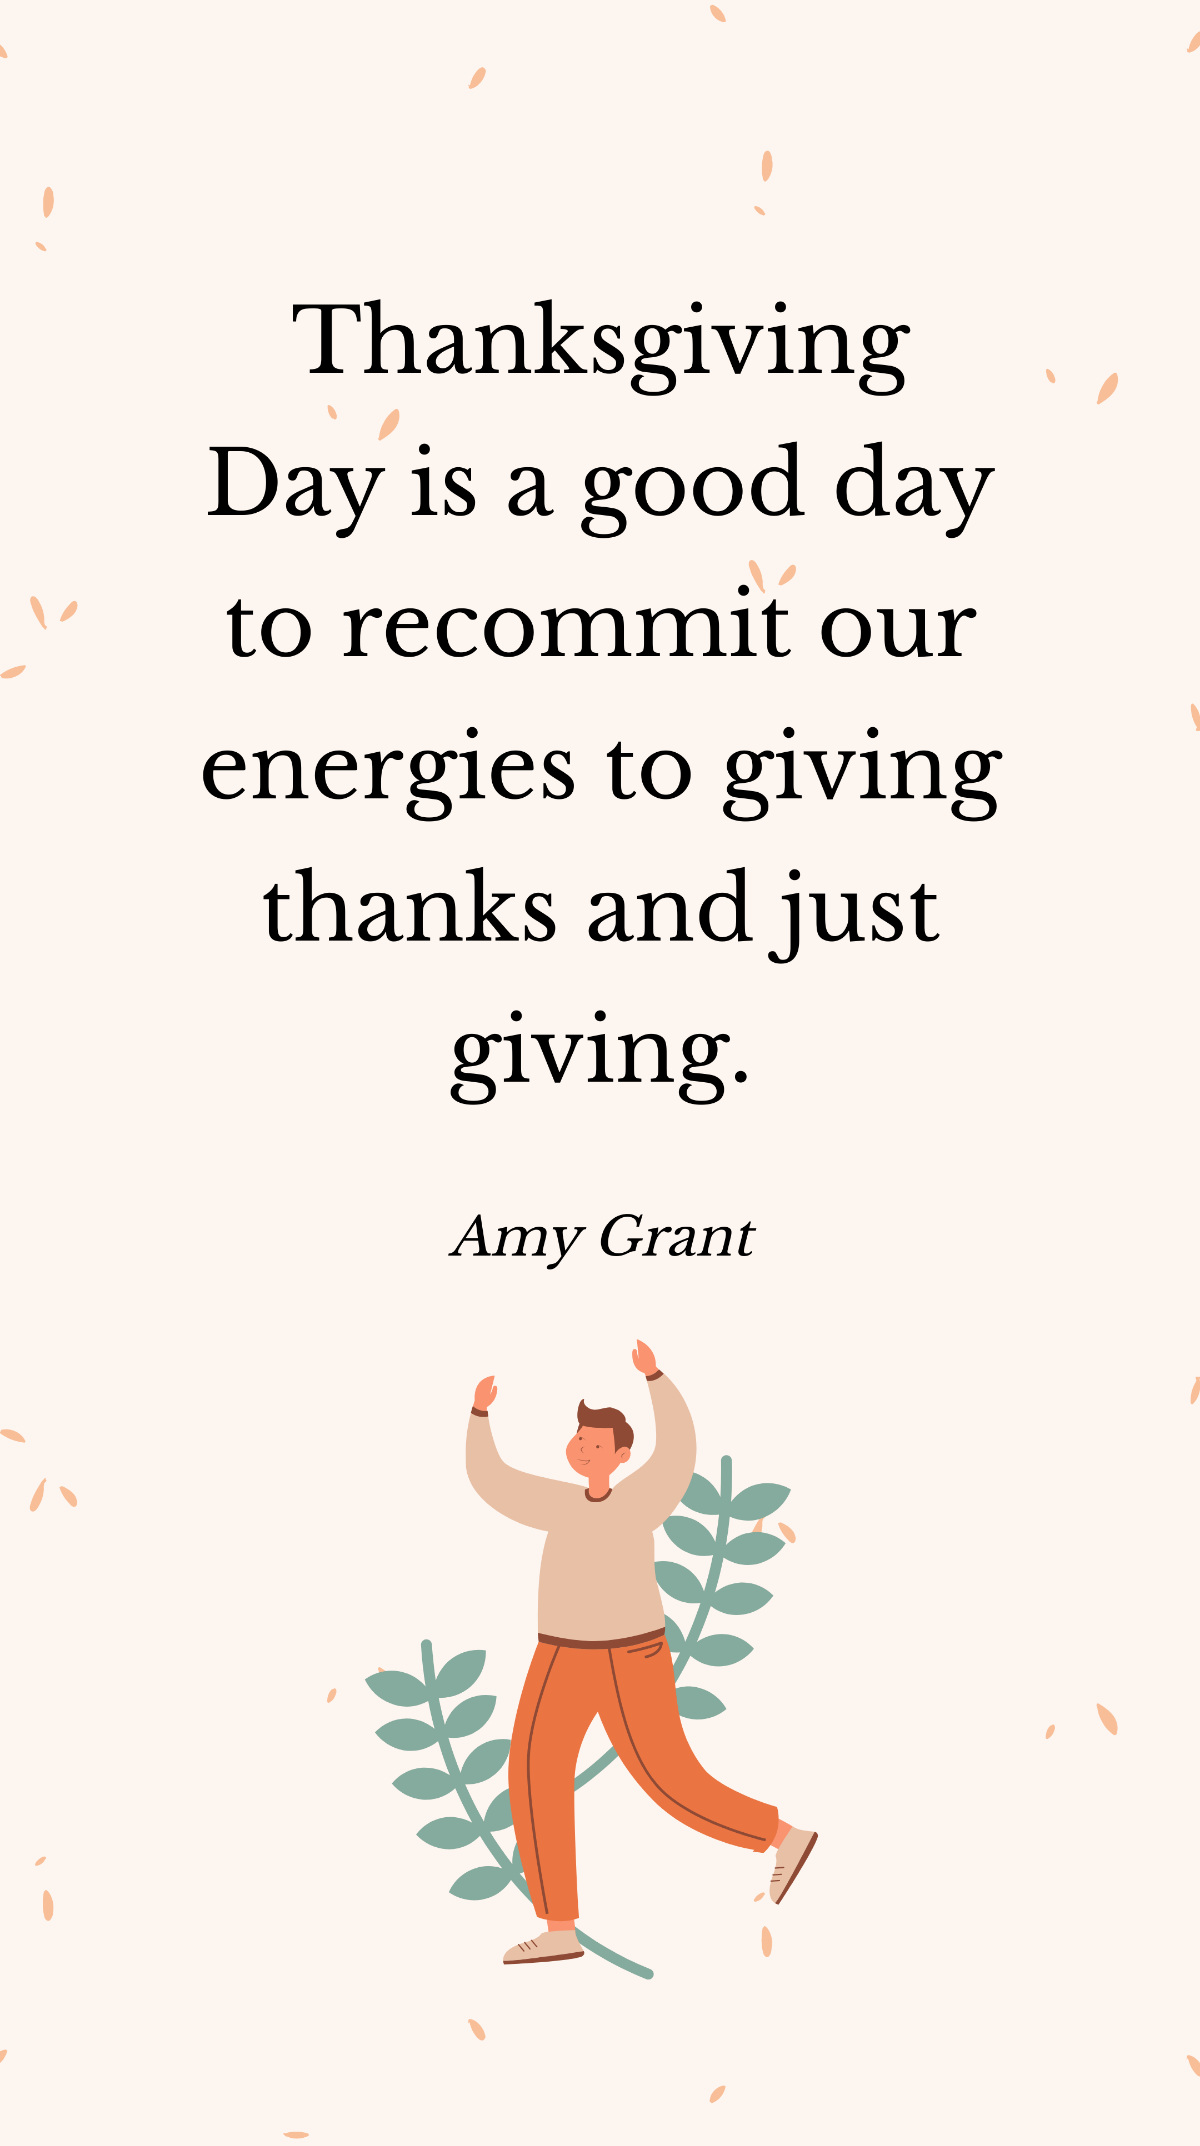 Amy Grant - Thanksgiving Day is a good day to recommit our energies to giving thanks and just giving. Template